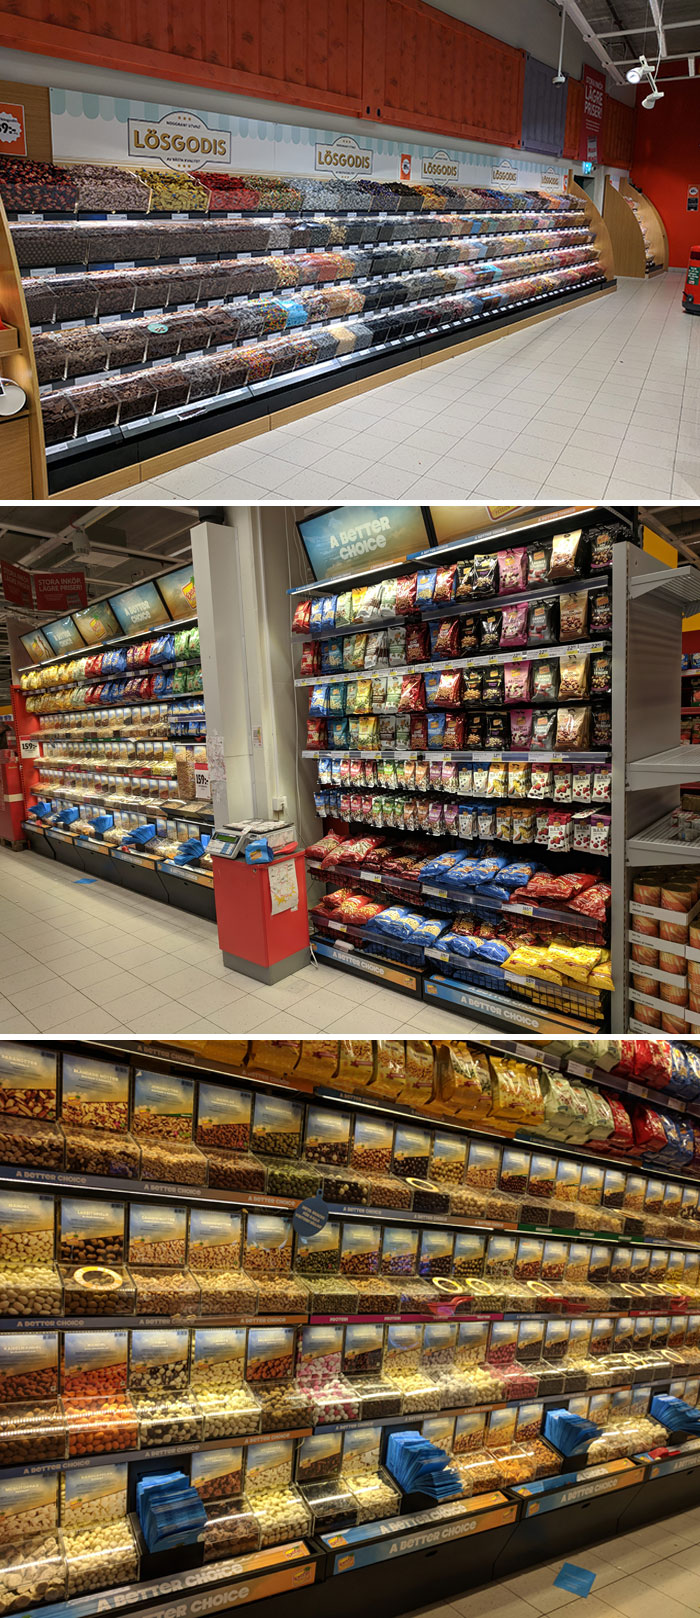 Candy In Sweden. This Is A Common Candy Section That Exists In Every Supermarket In Sweden